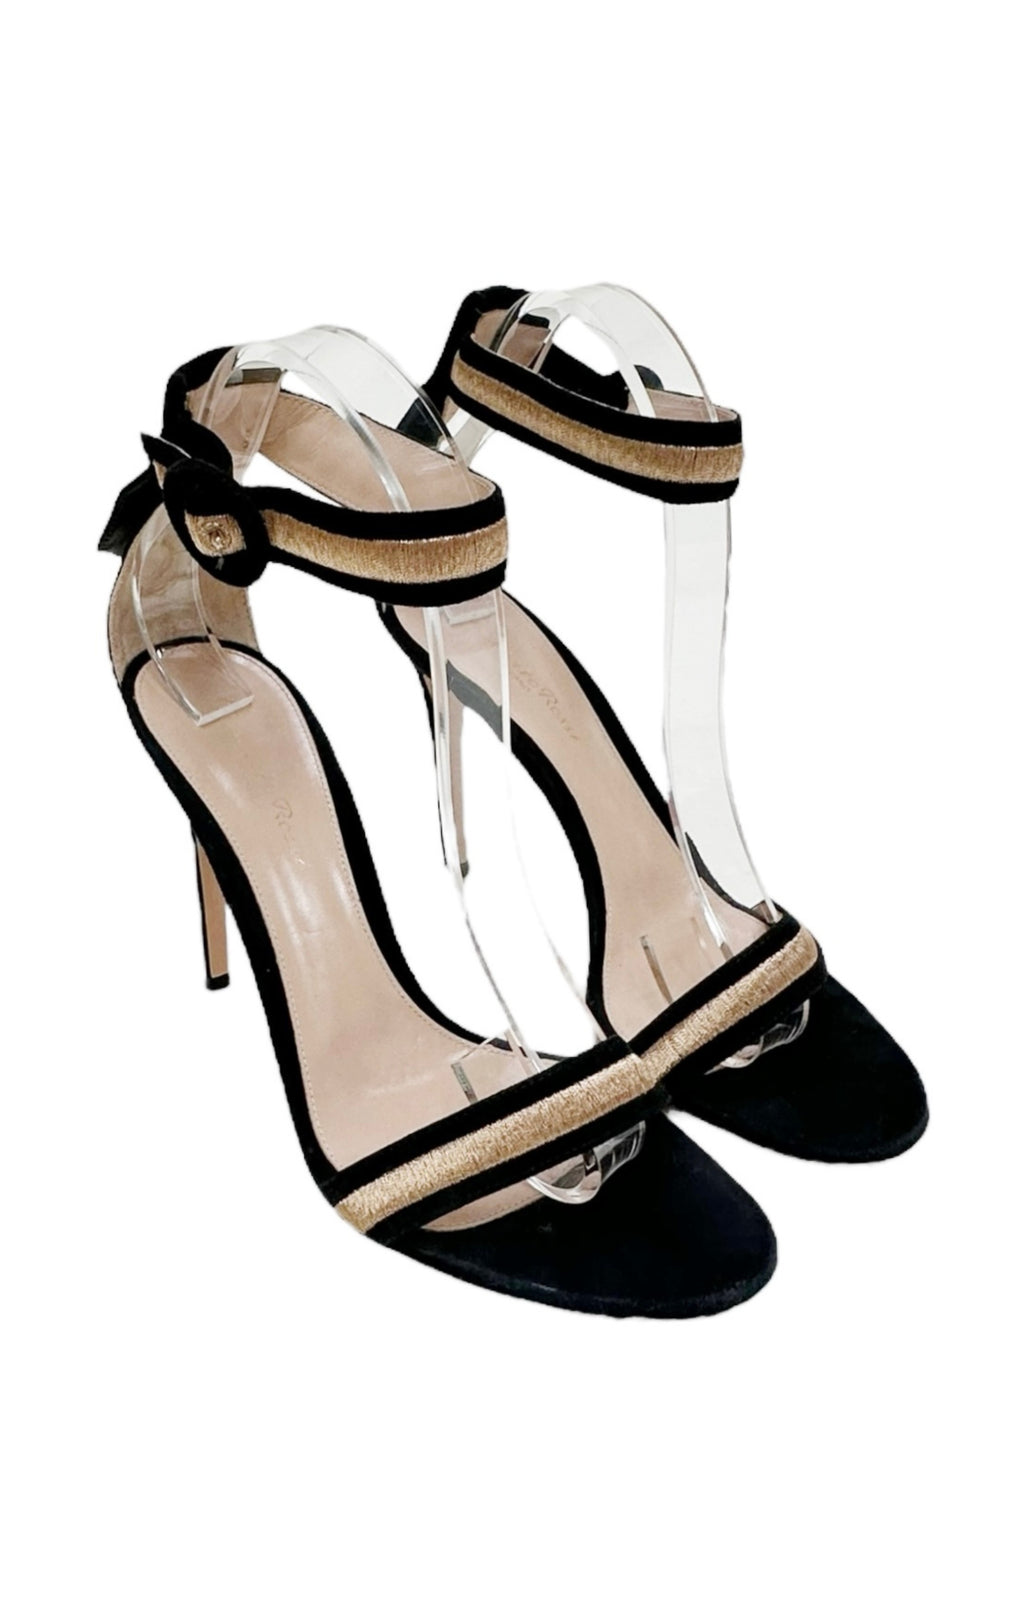 GIANVITO ROSSI (RARE) Sandals Size: EUR 39 / Fit like US 9